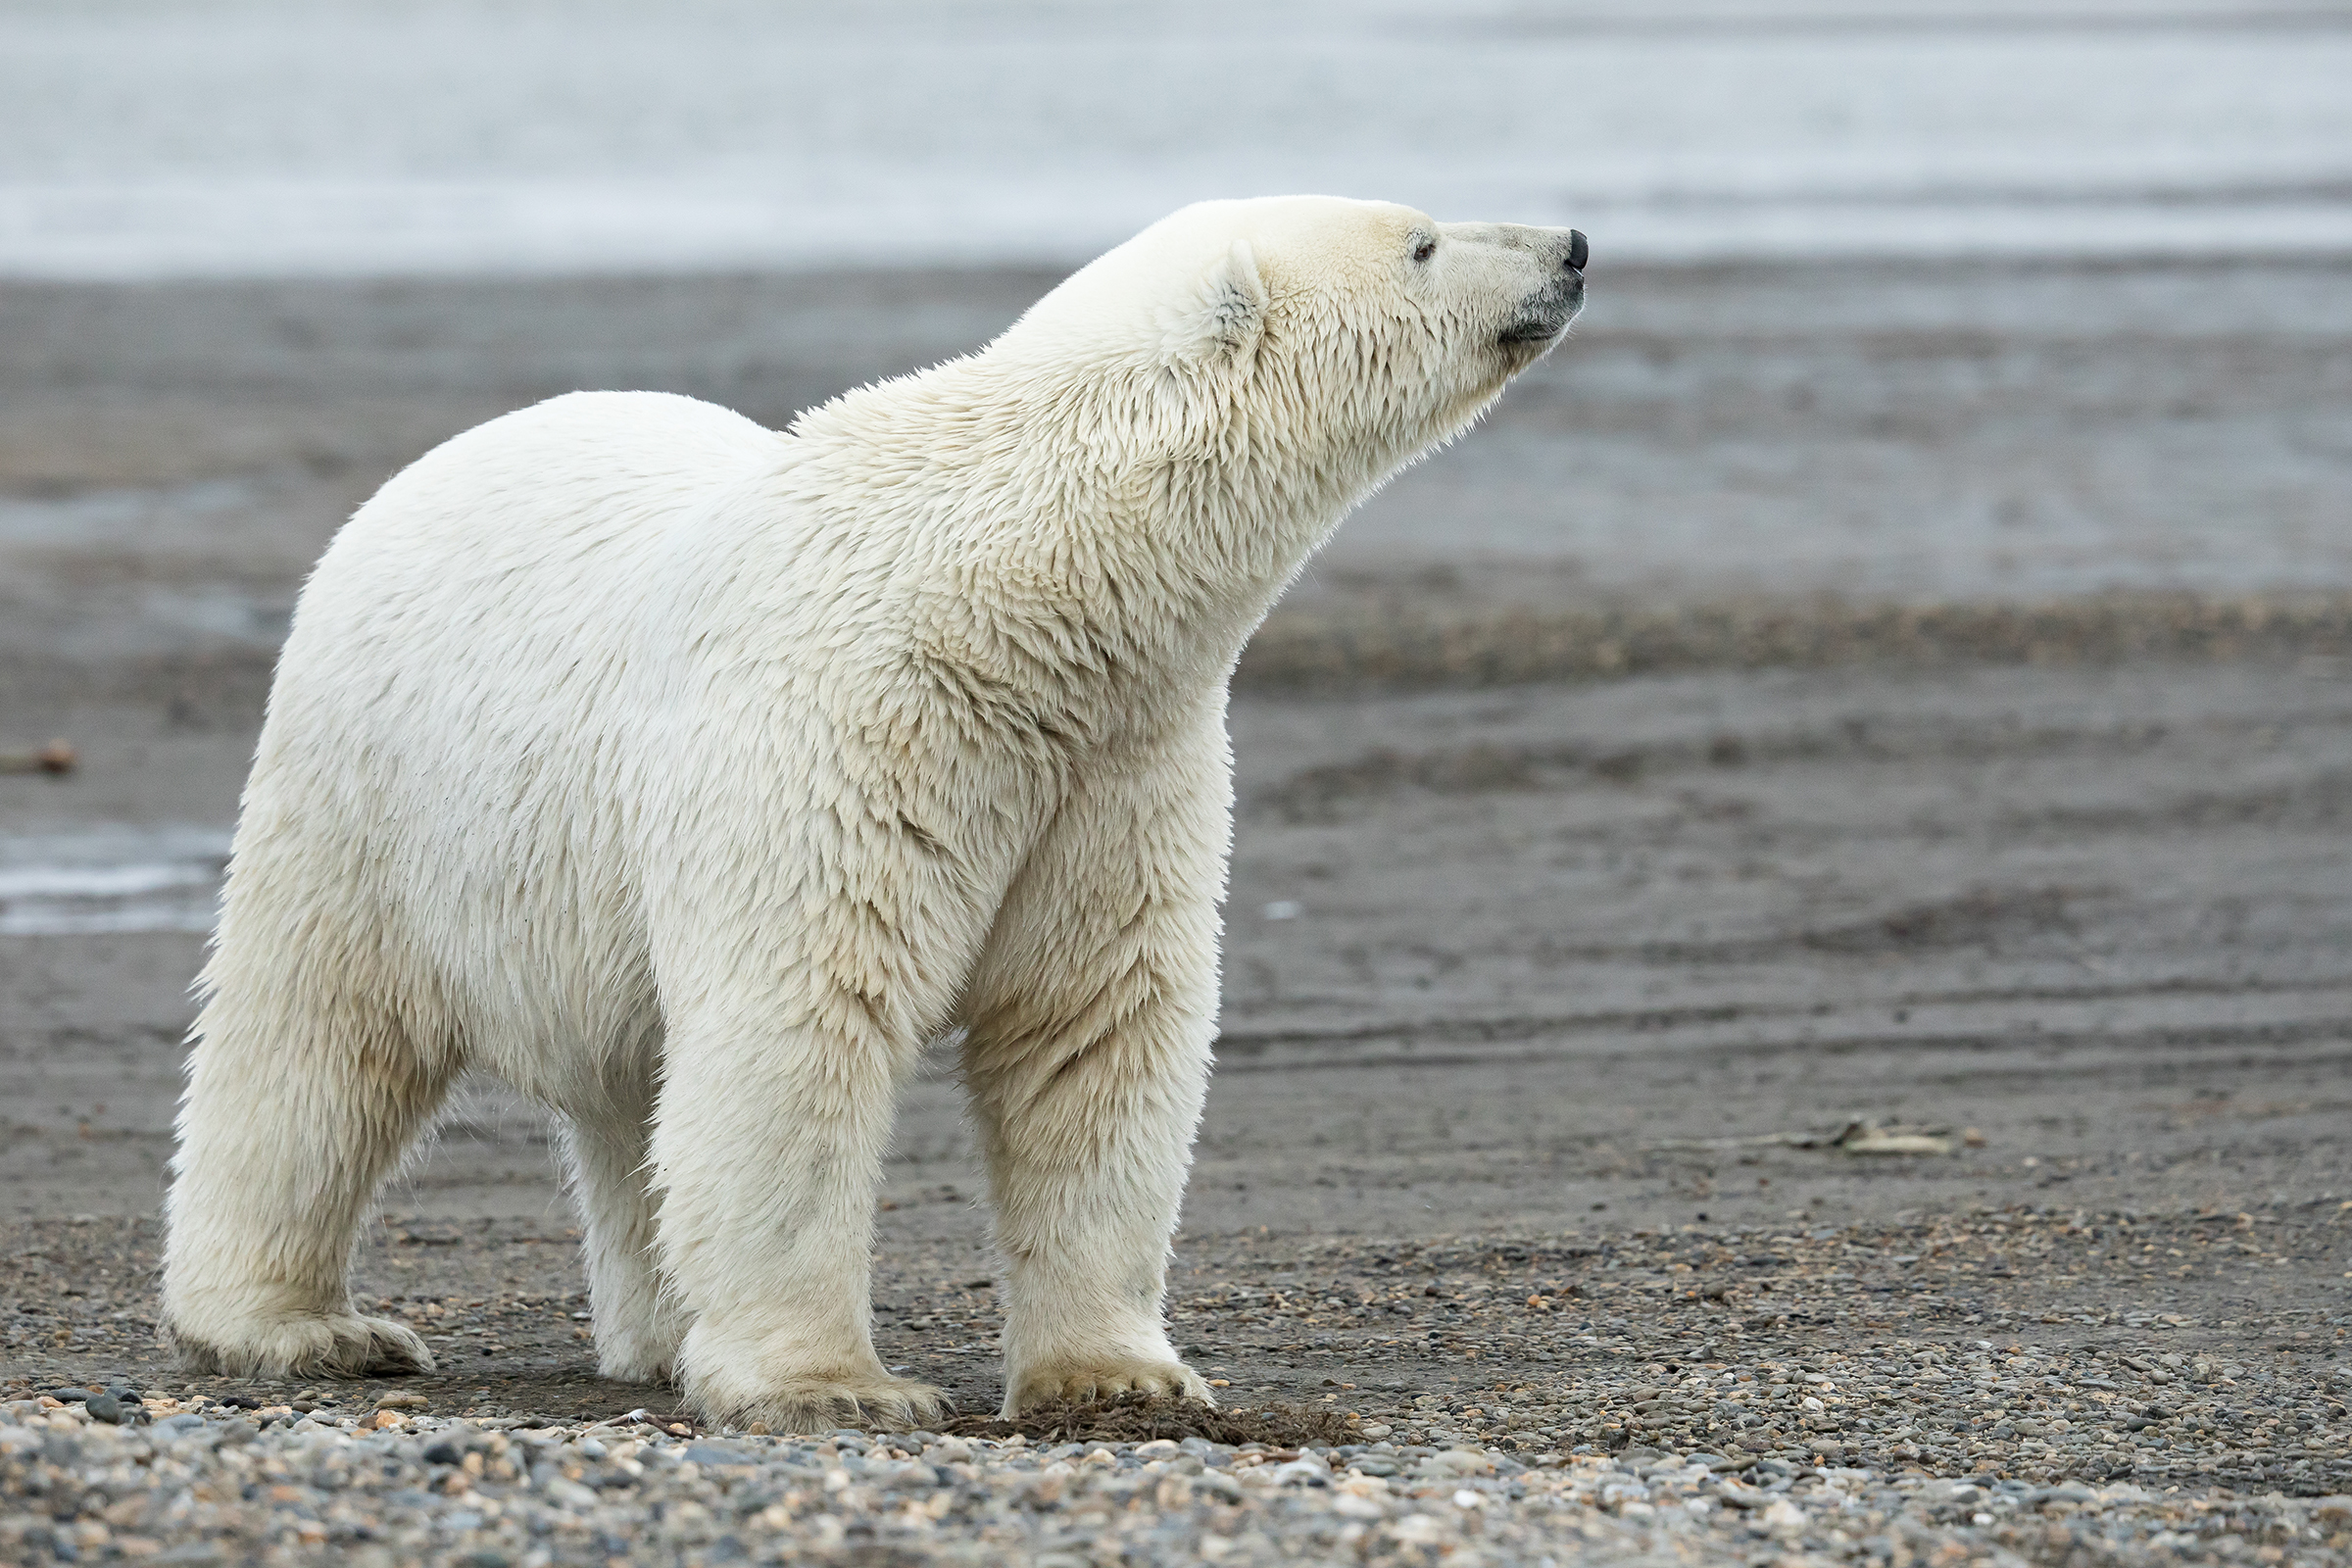 A white polar bear seems to sniff for a scent on the wind as it stands on gravel near a shoreline.